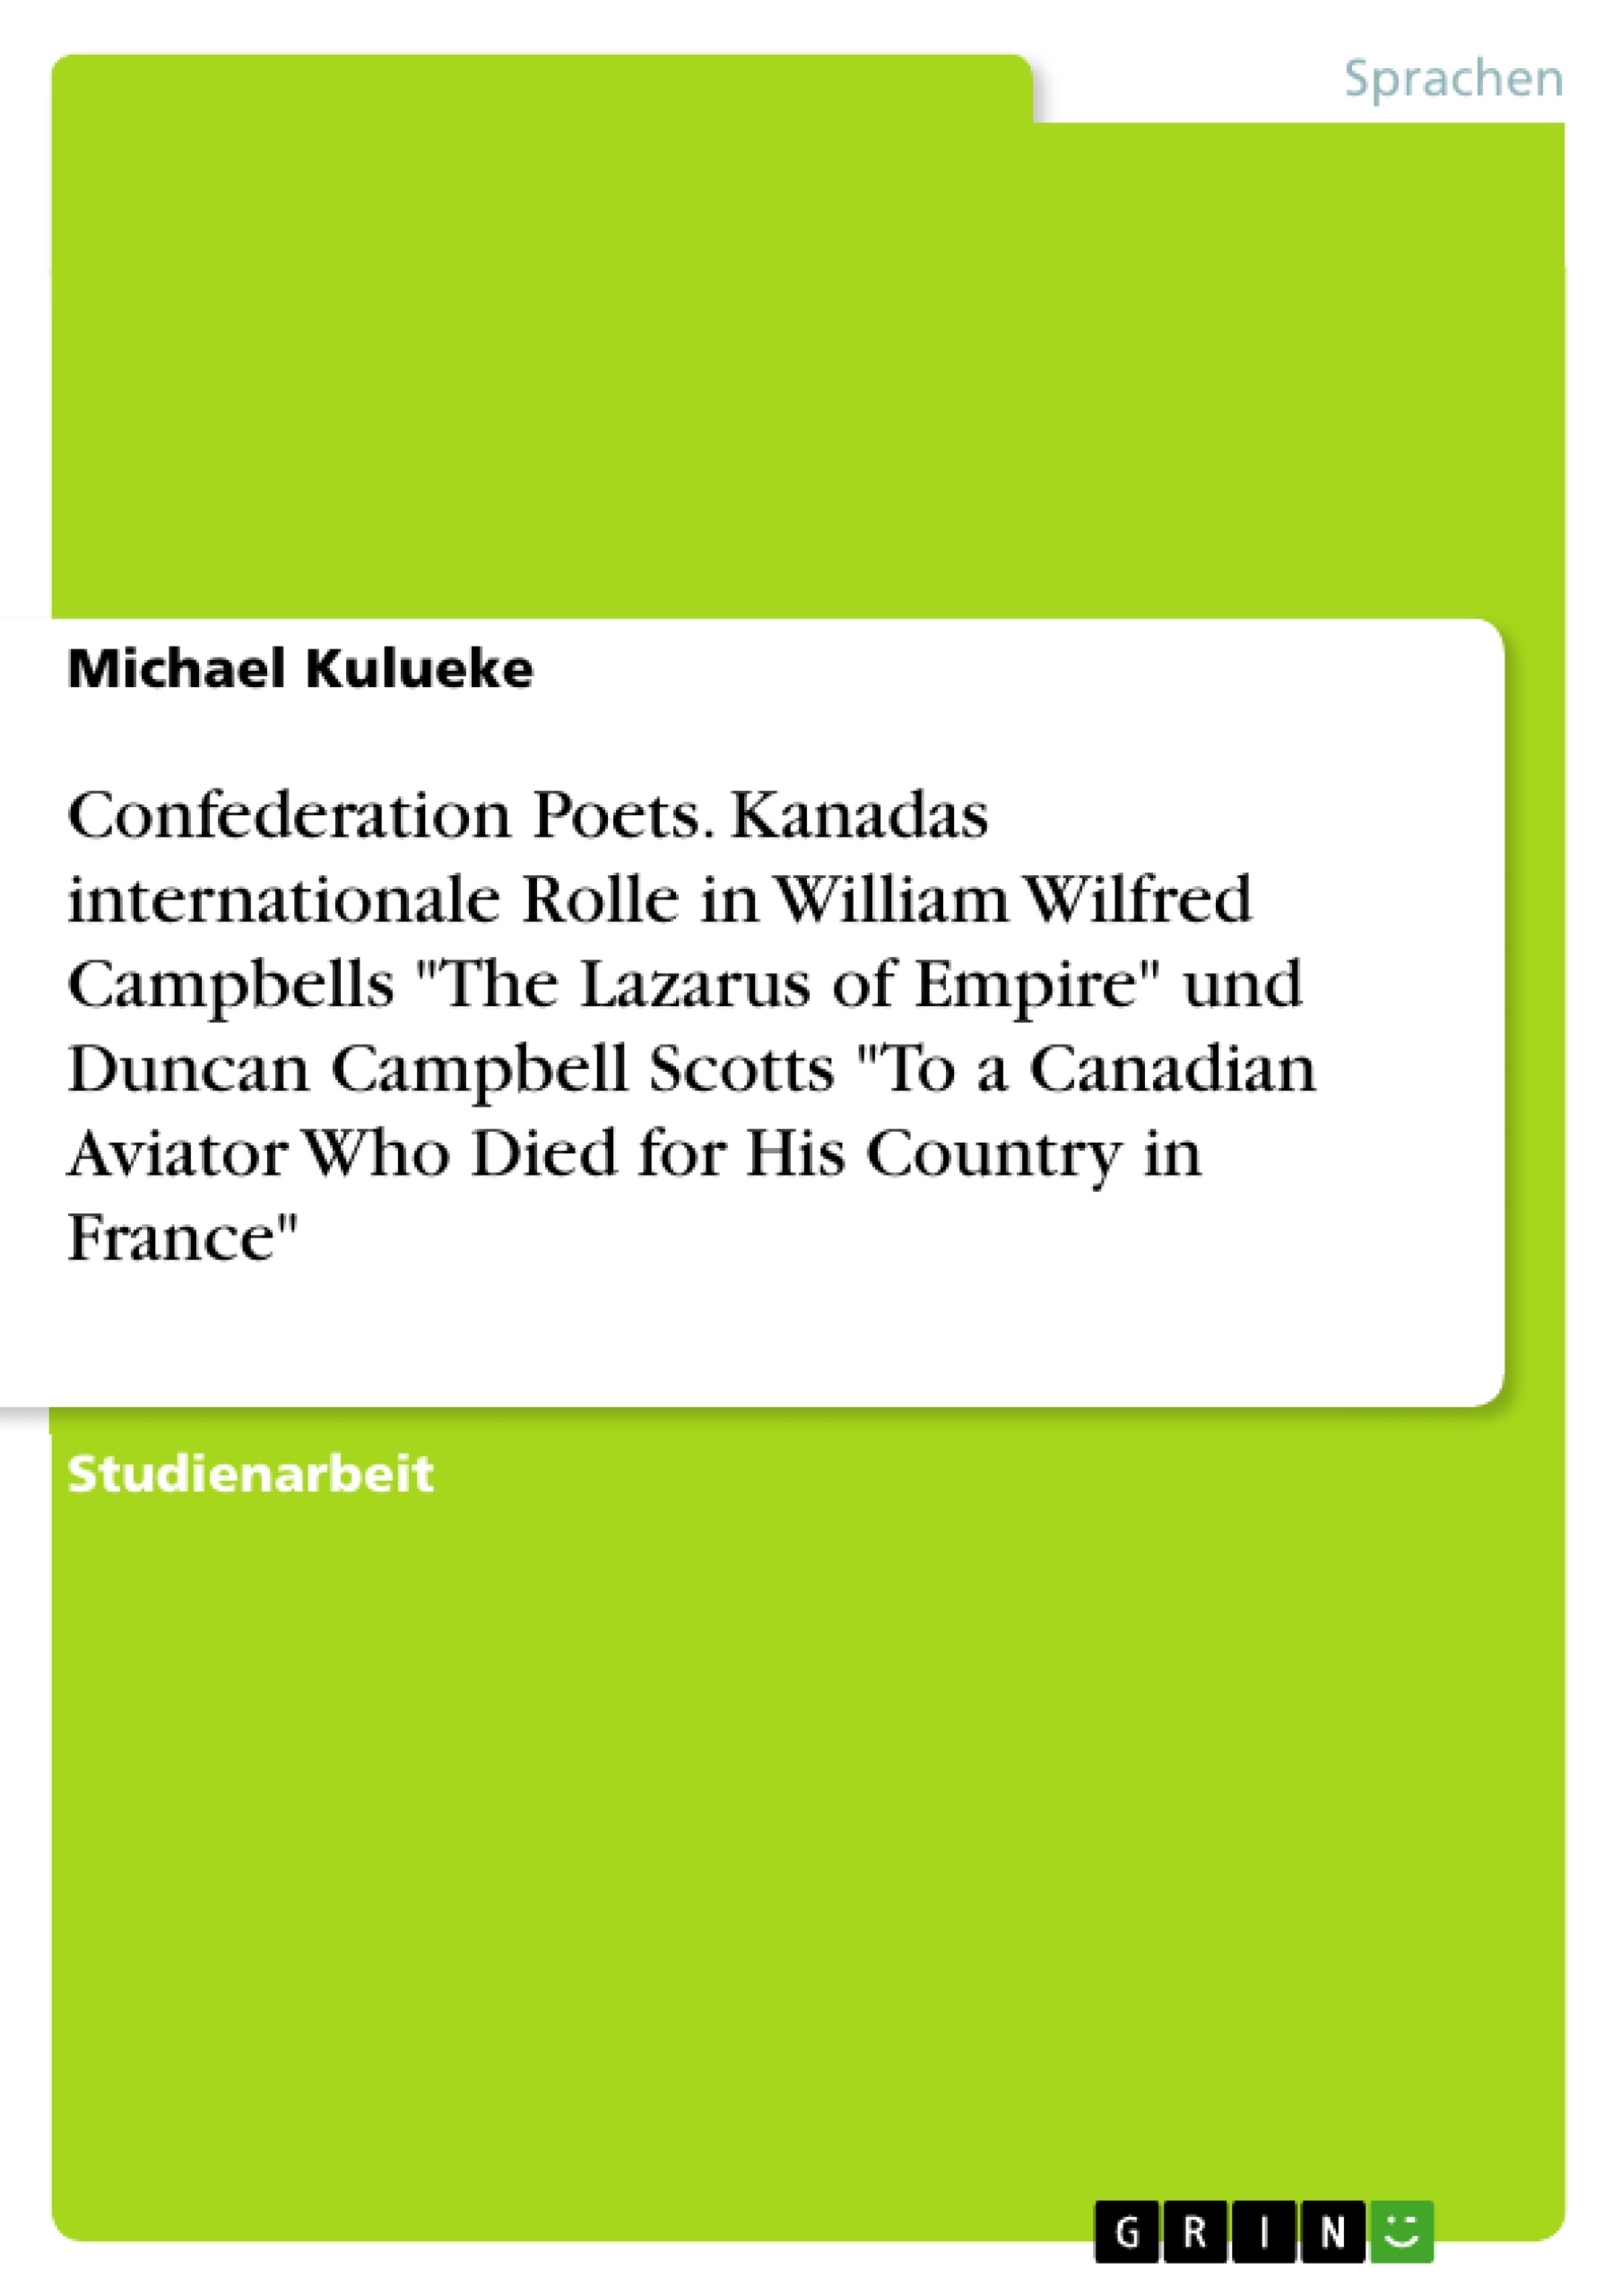 Titel: Confederation Poets. Kanadas internationale Rolle in William Wilfred Campbells "The Lazarus of Empire" und Duncan Campbell Scotts "To a Canadian Aviator Who Died for His Country in France"